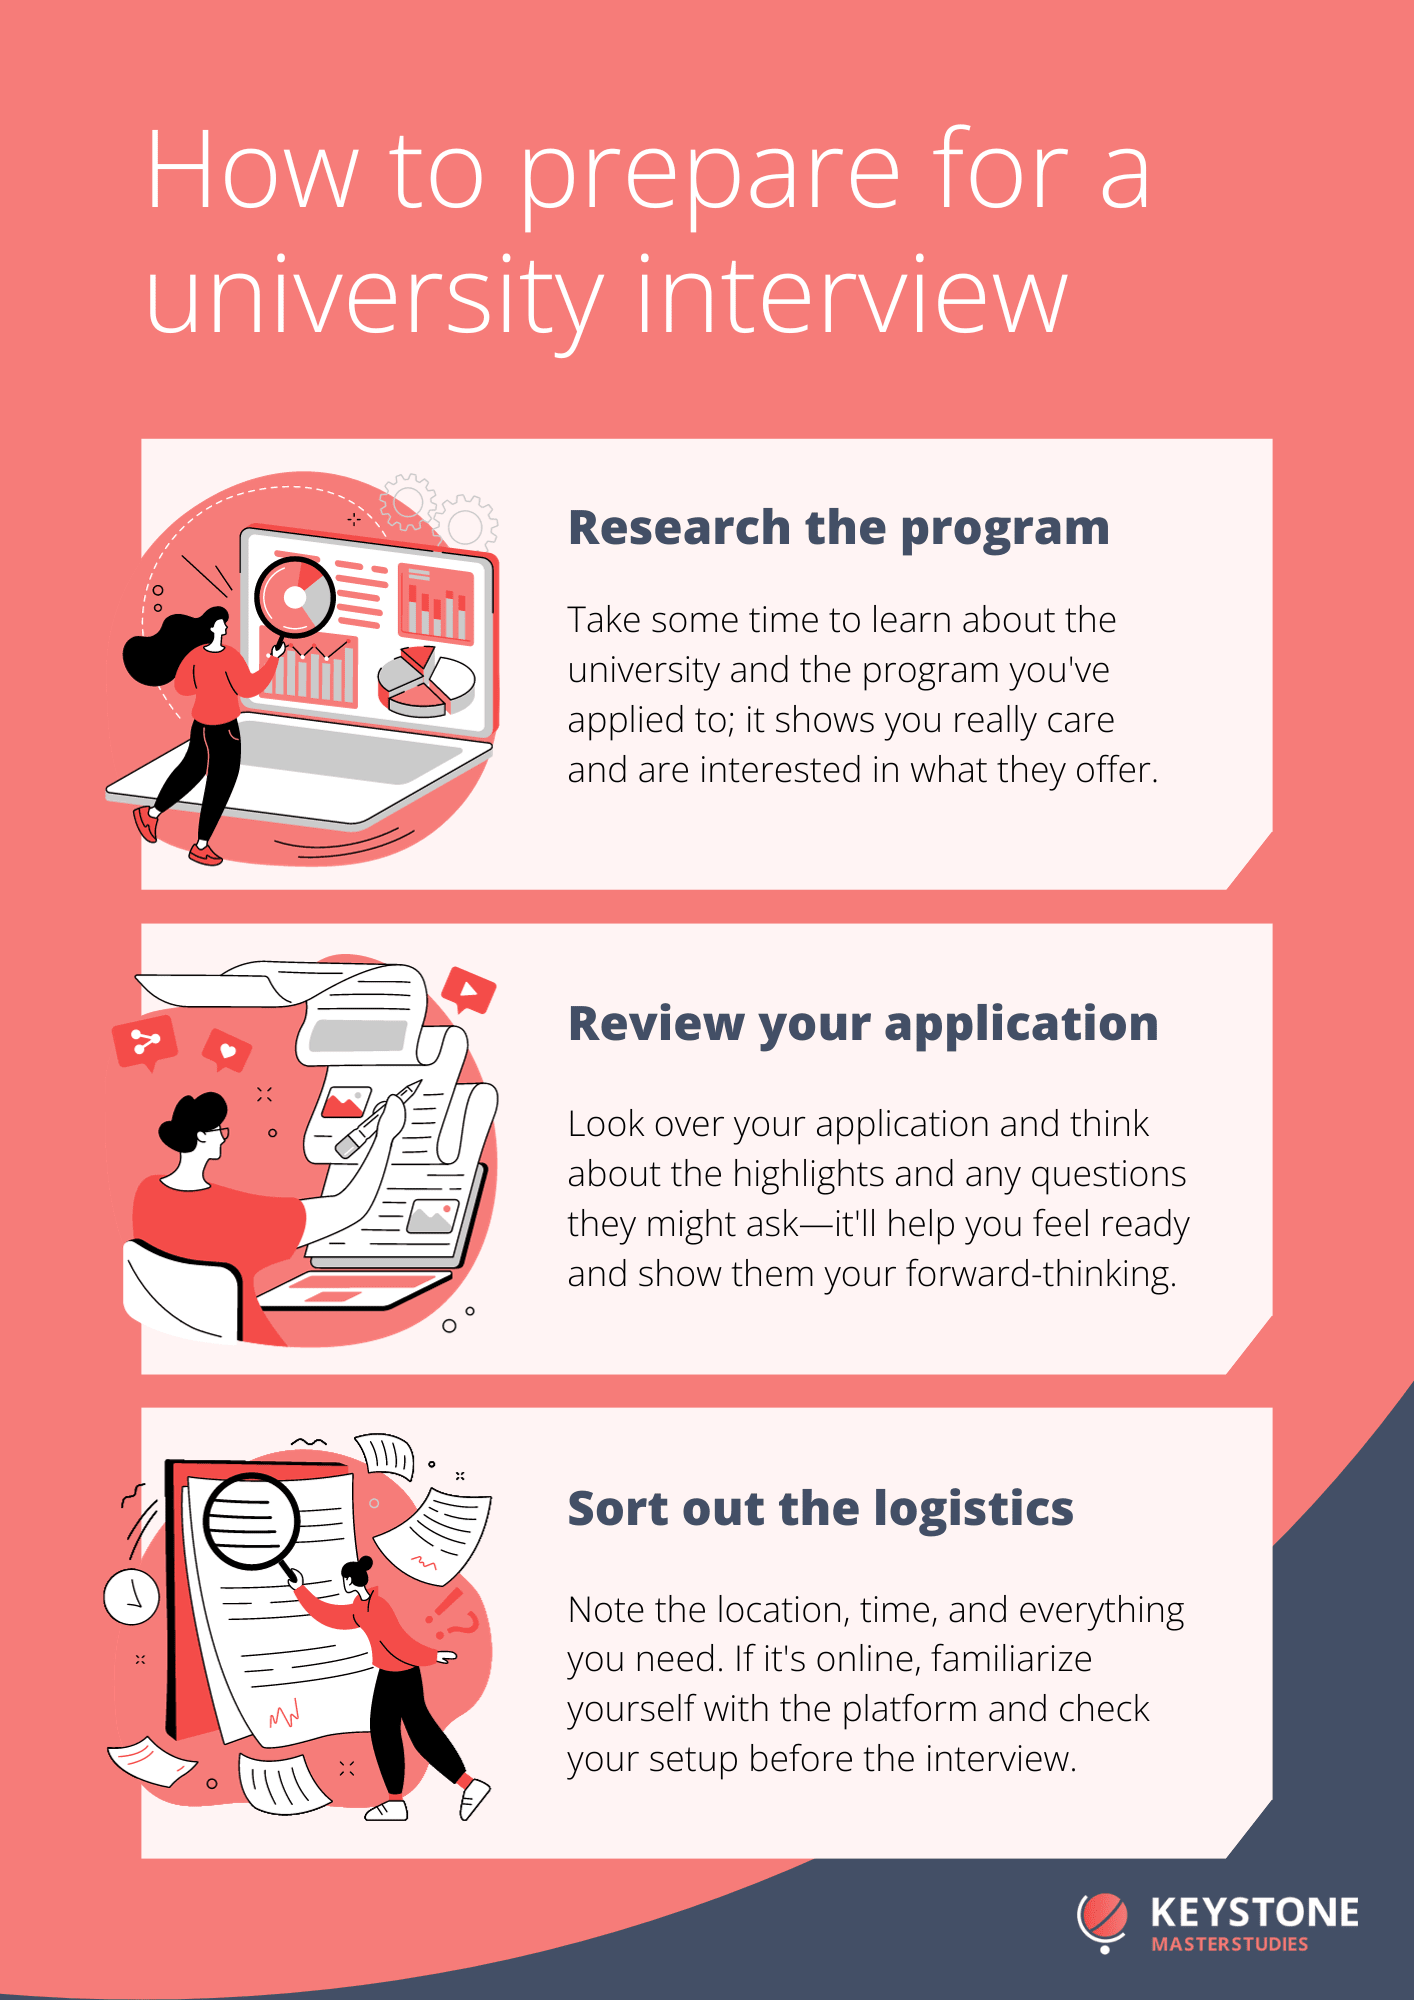 How to prepare for a university interview - infographic